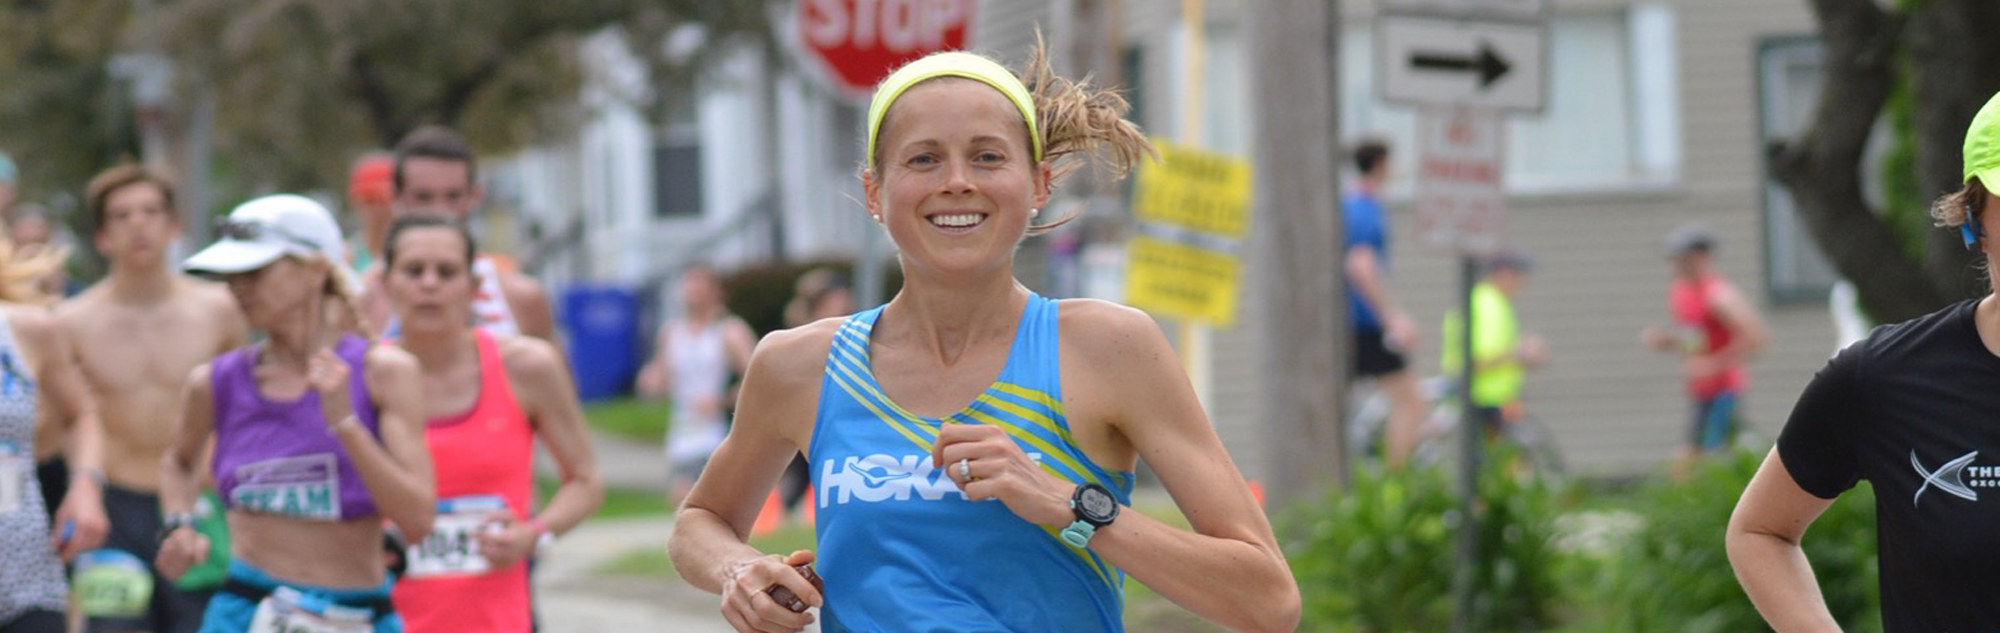 Smiling female runner in race with other runners in background